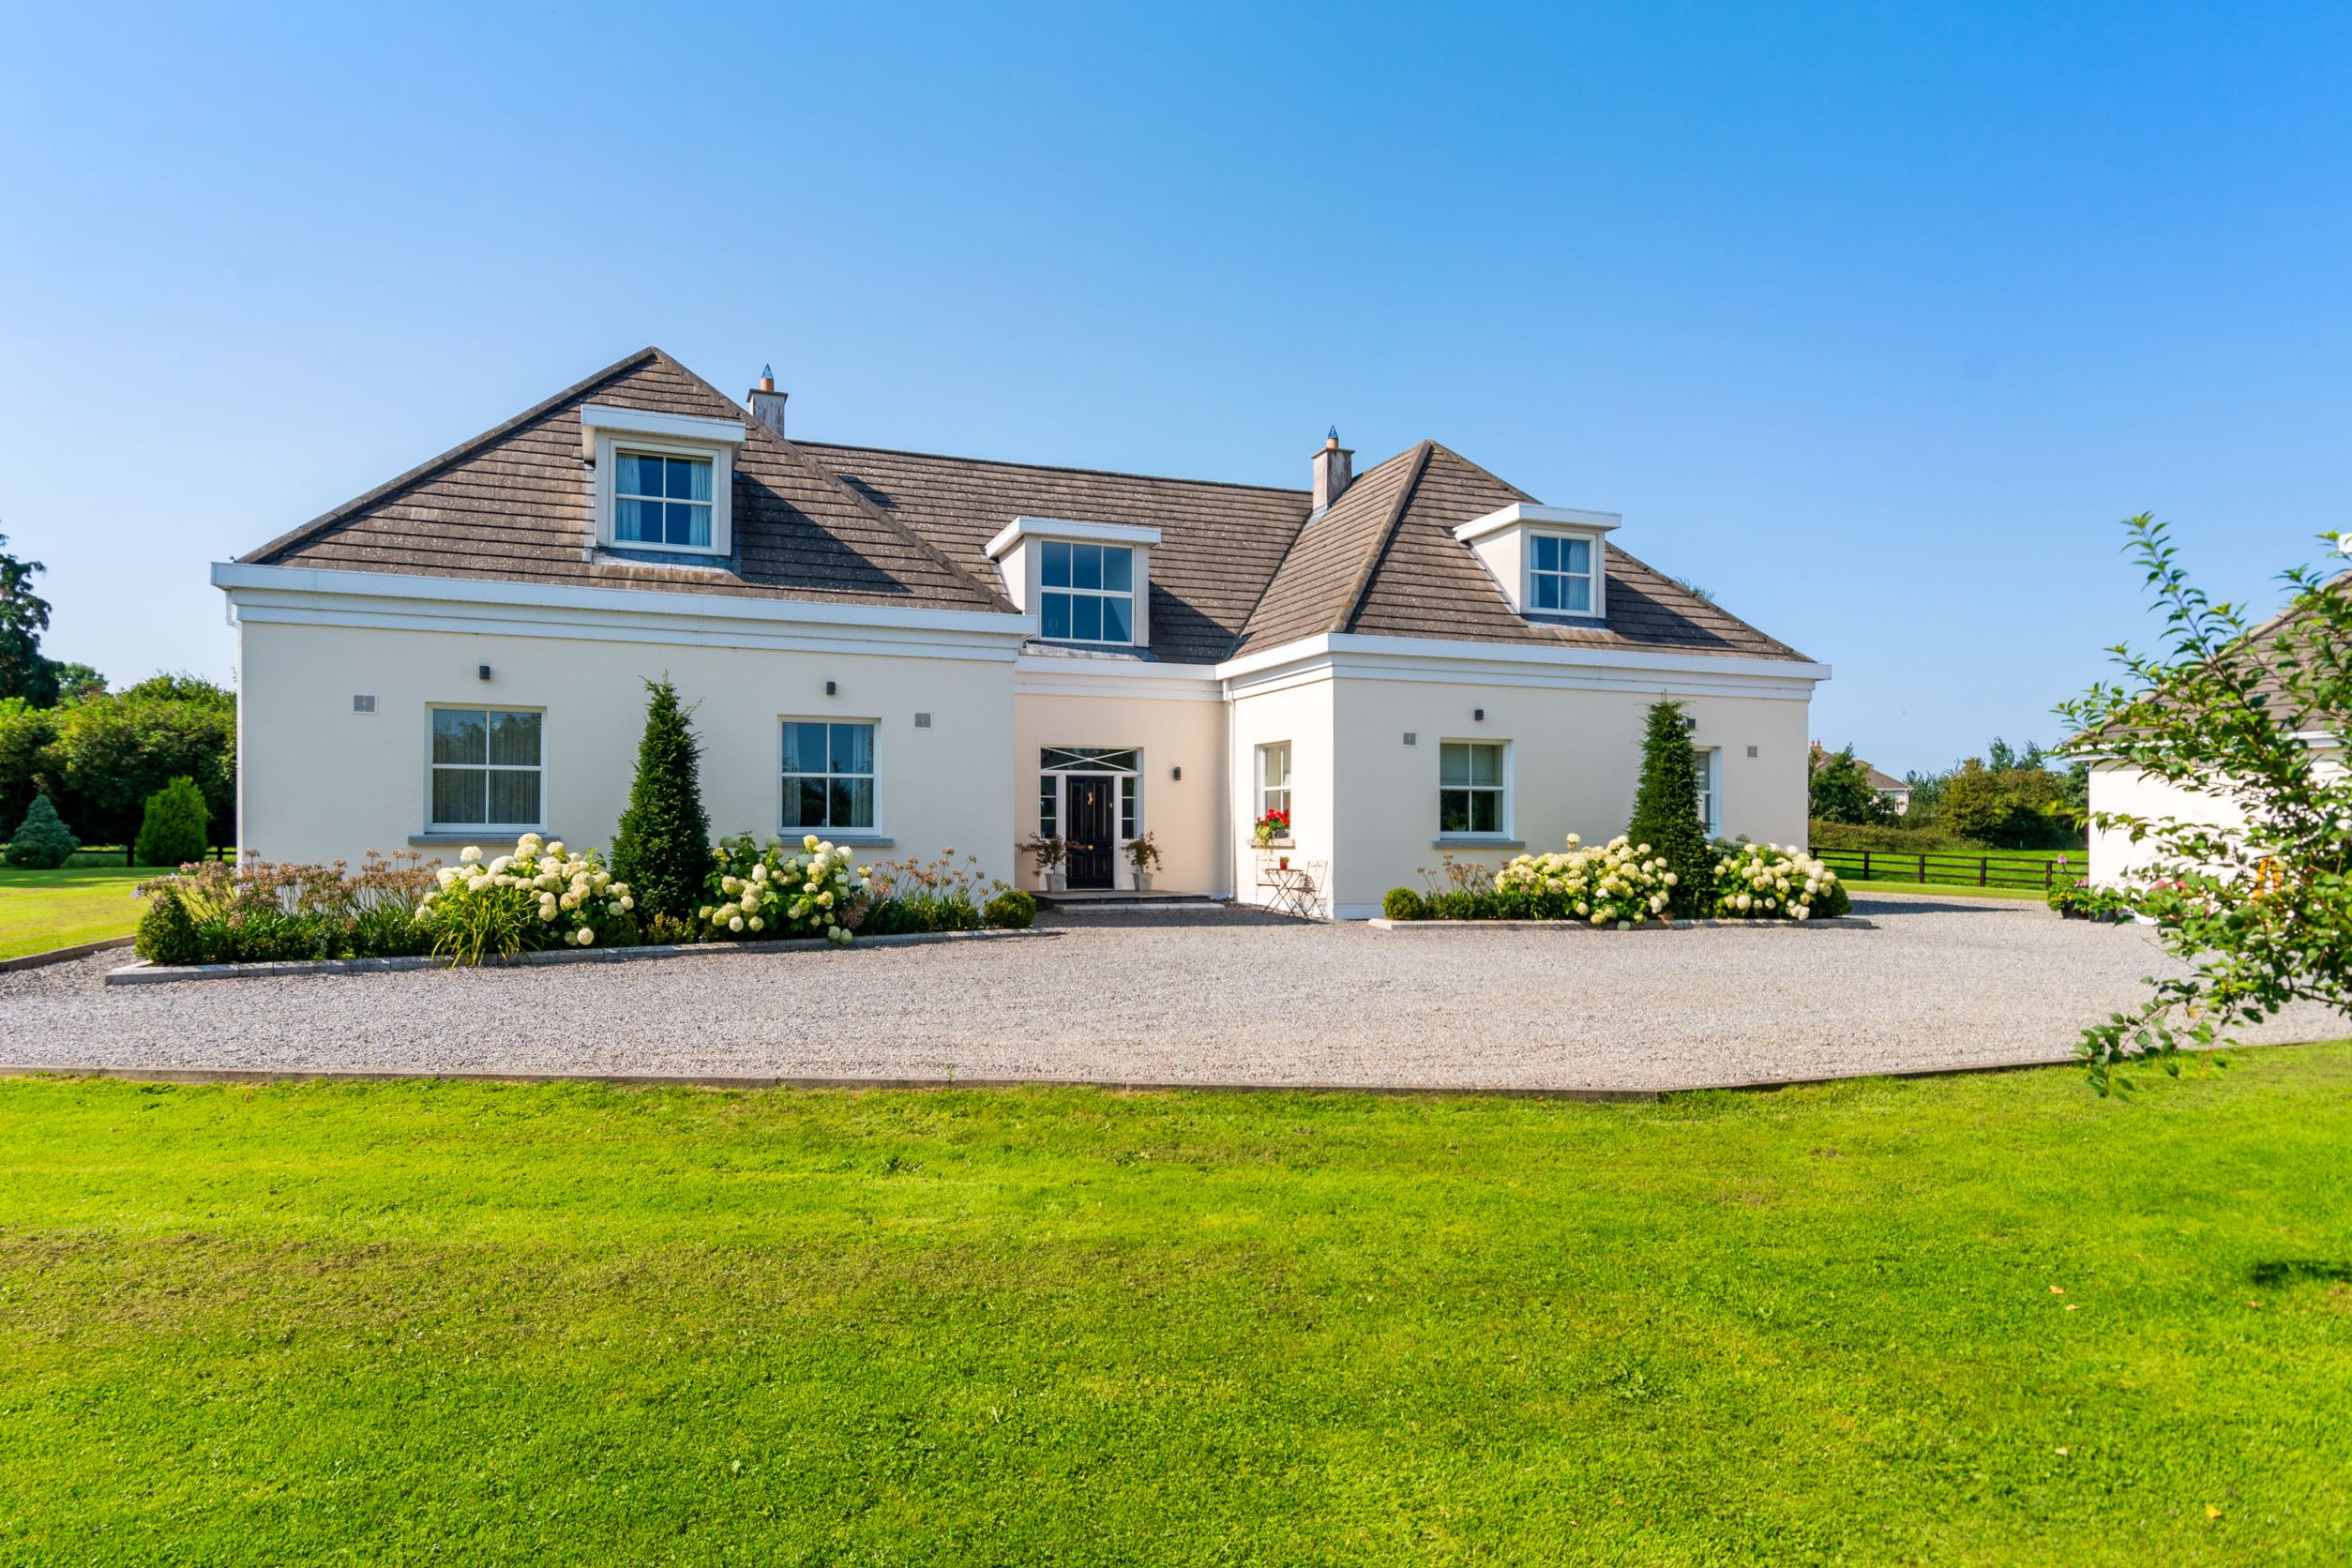 No Clues Needed to Find Stunning Home in Sherlockstown